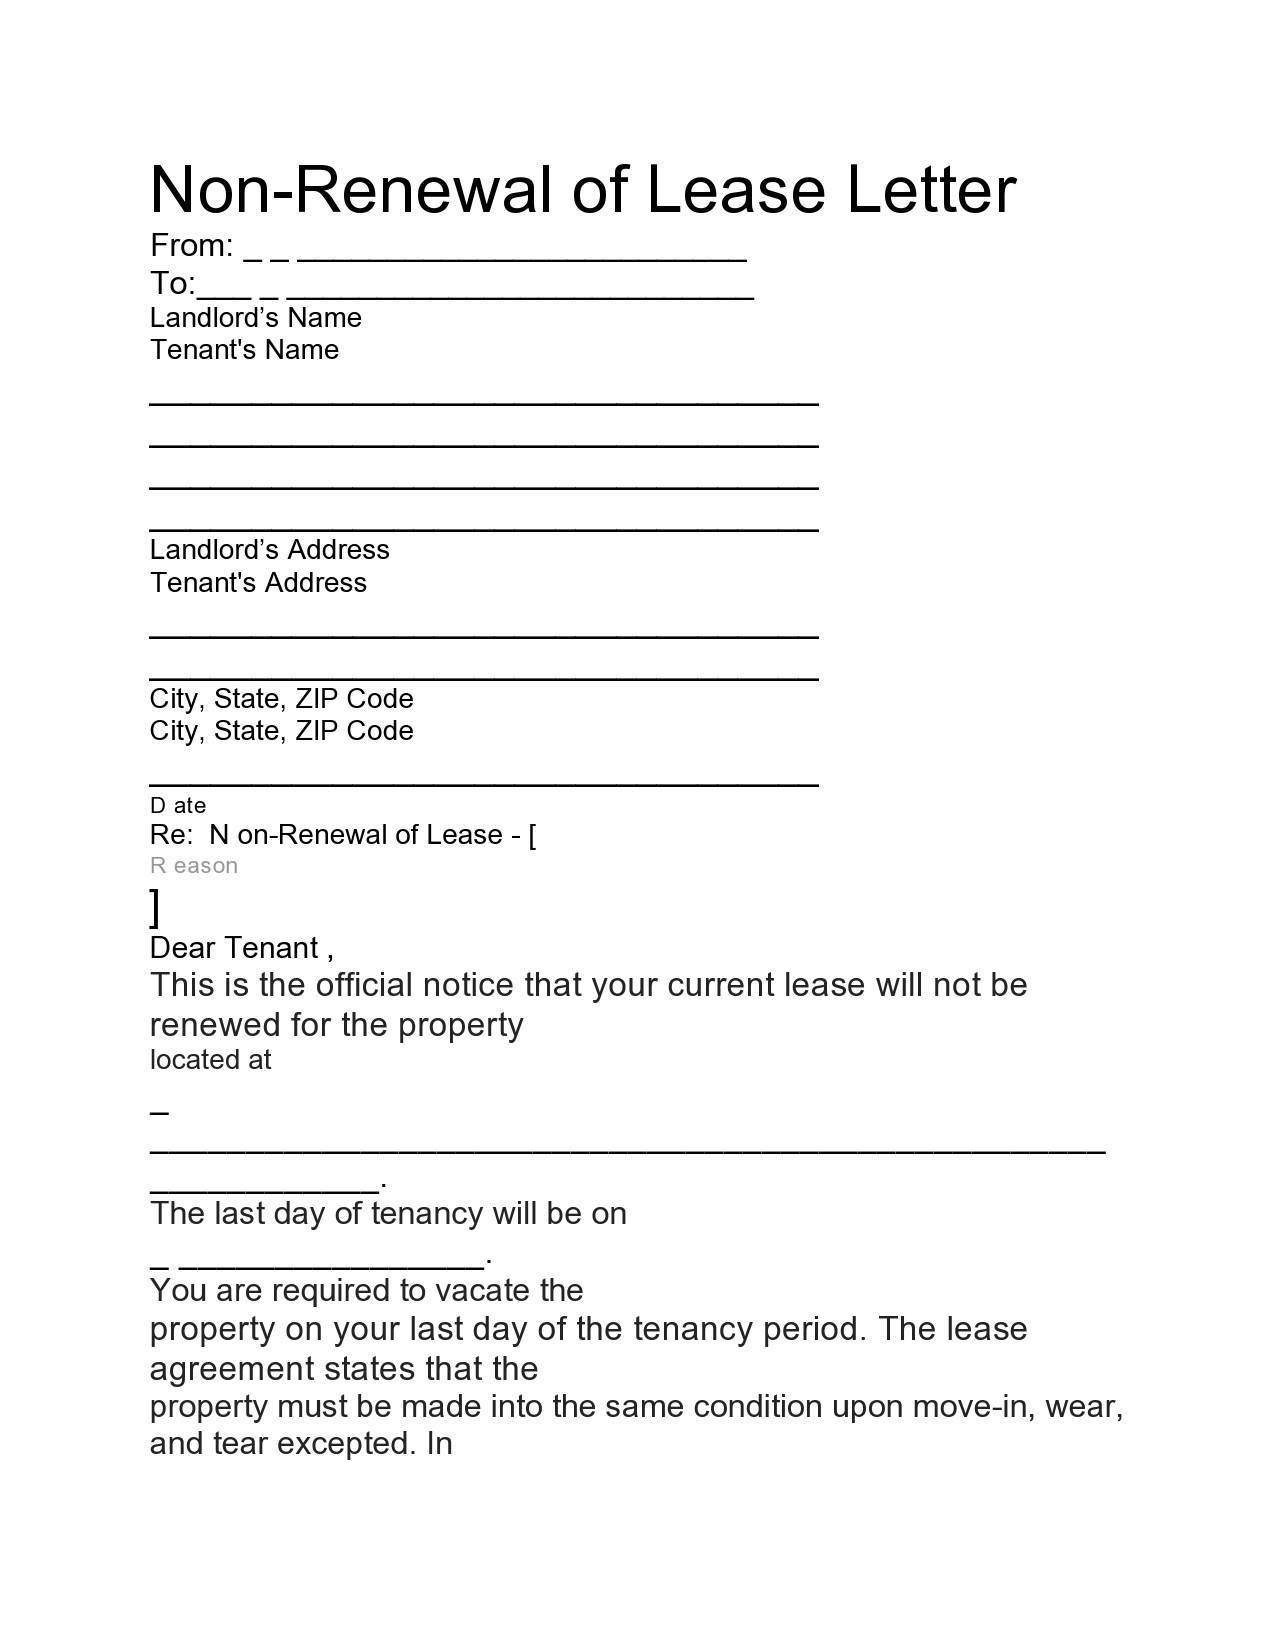 Free not renewing lease letter 13